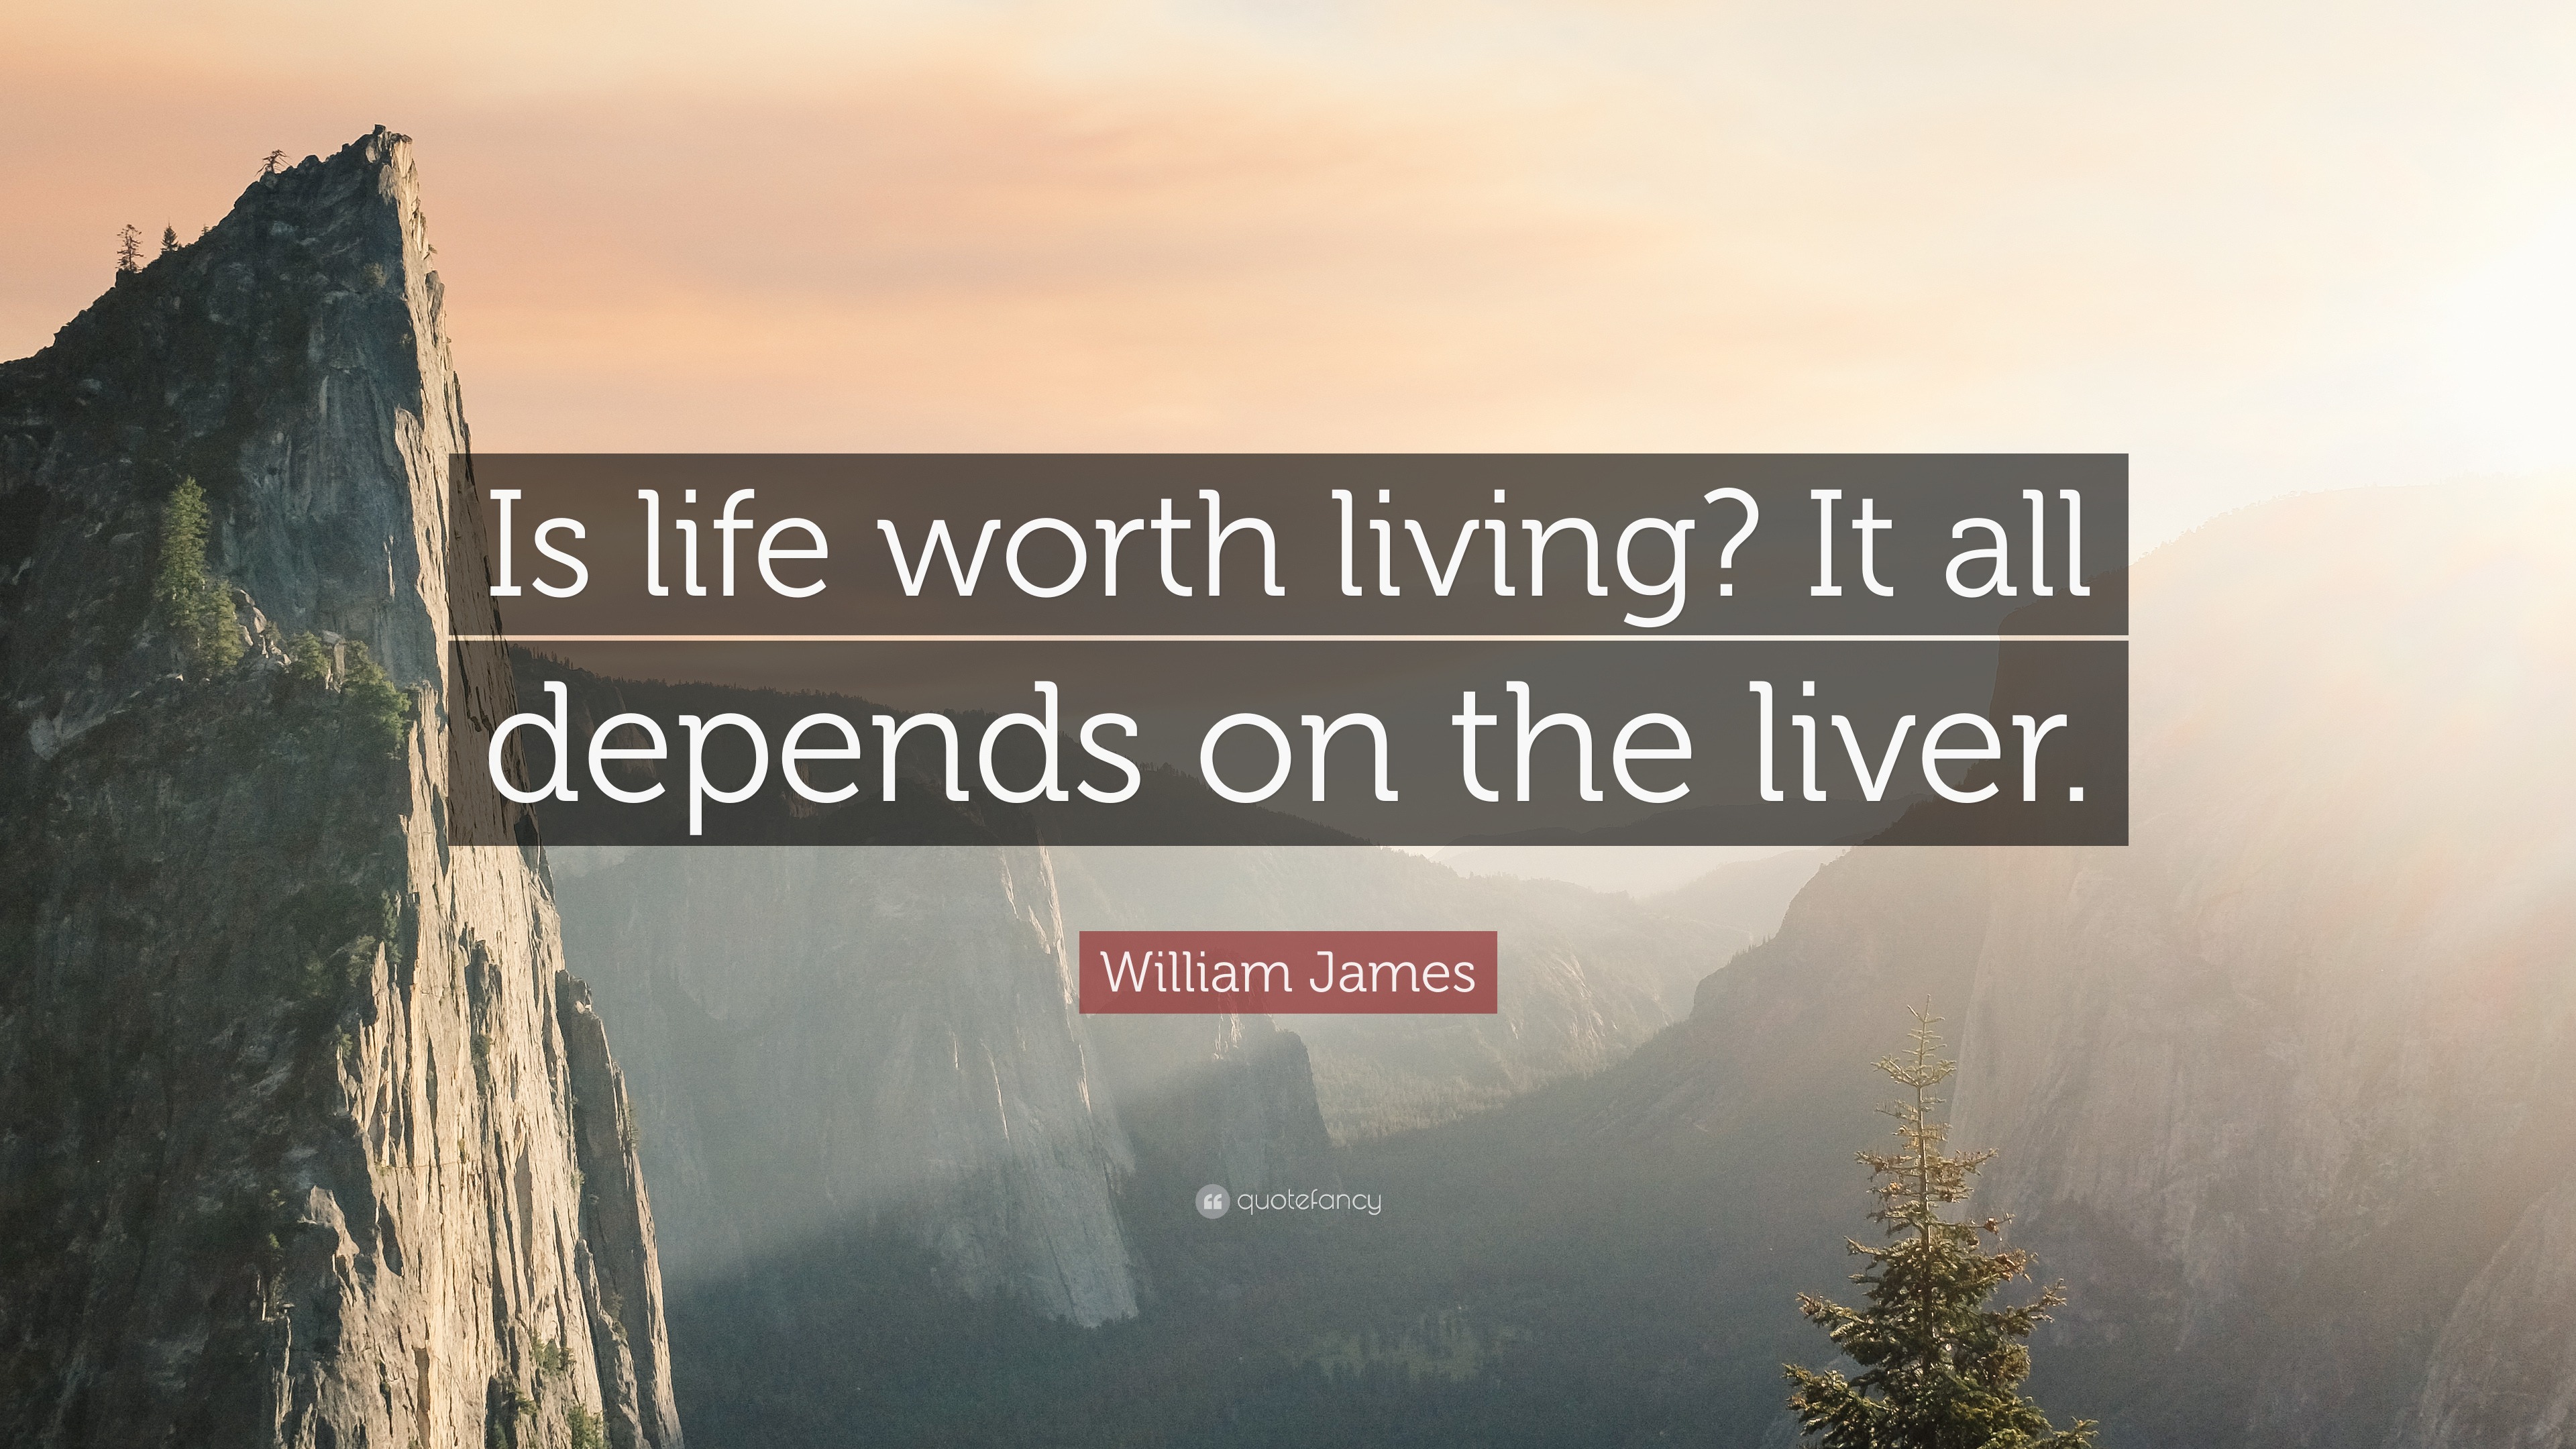 life is worth living quotes william james quote u201cis life worth living it all depends on the